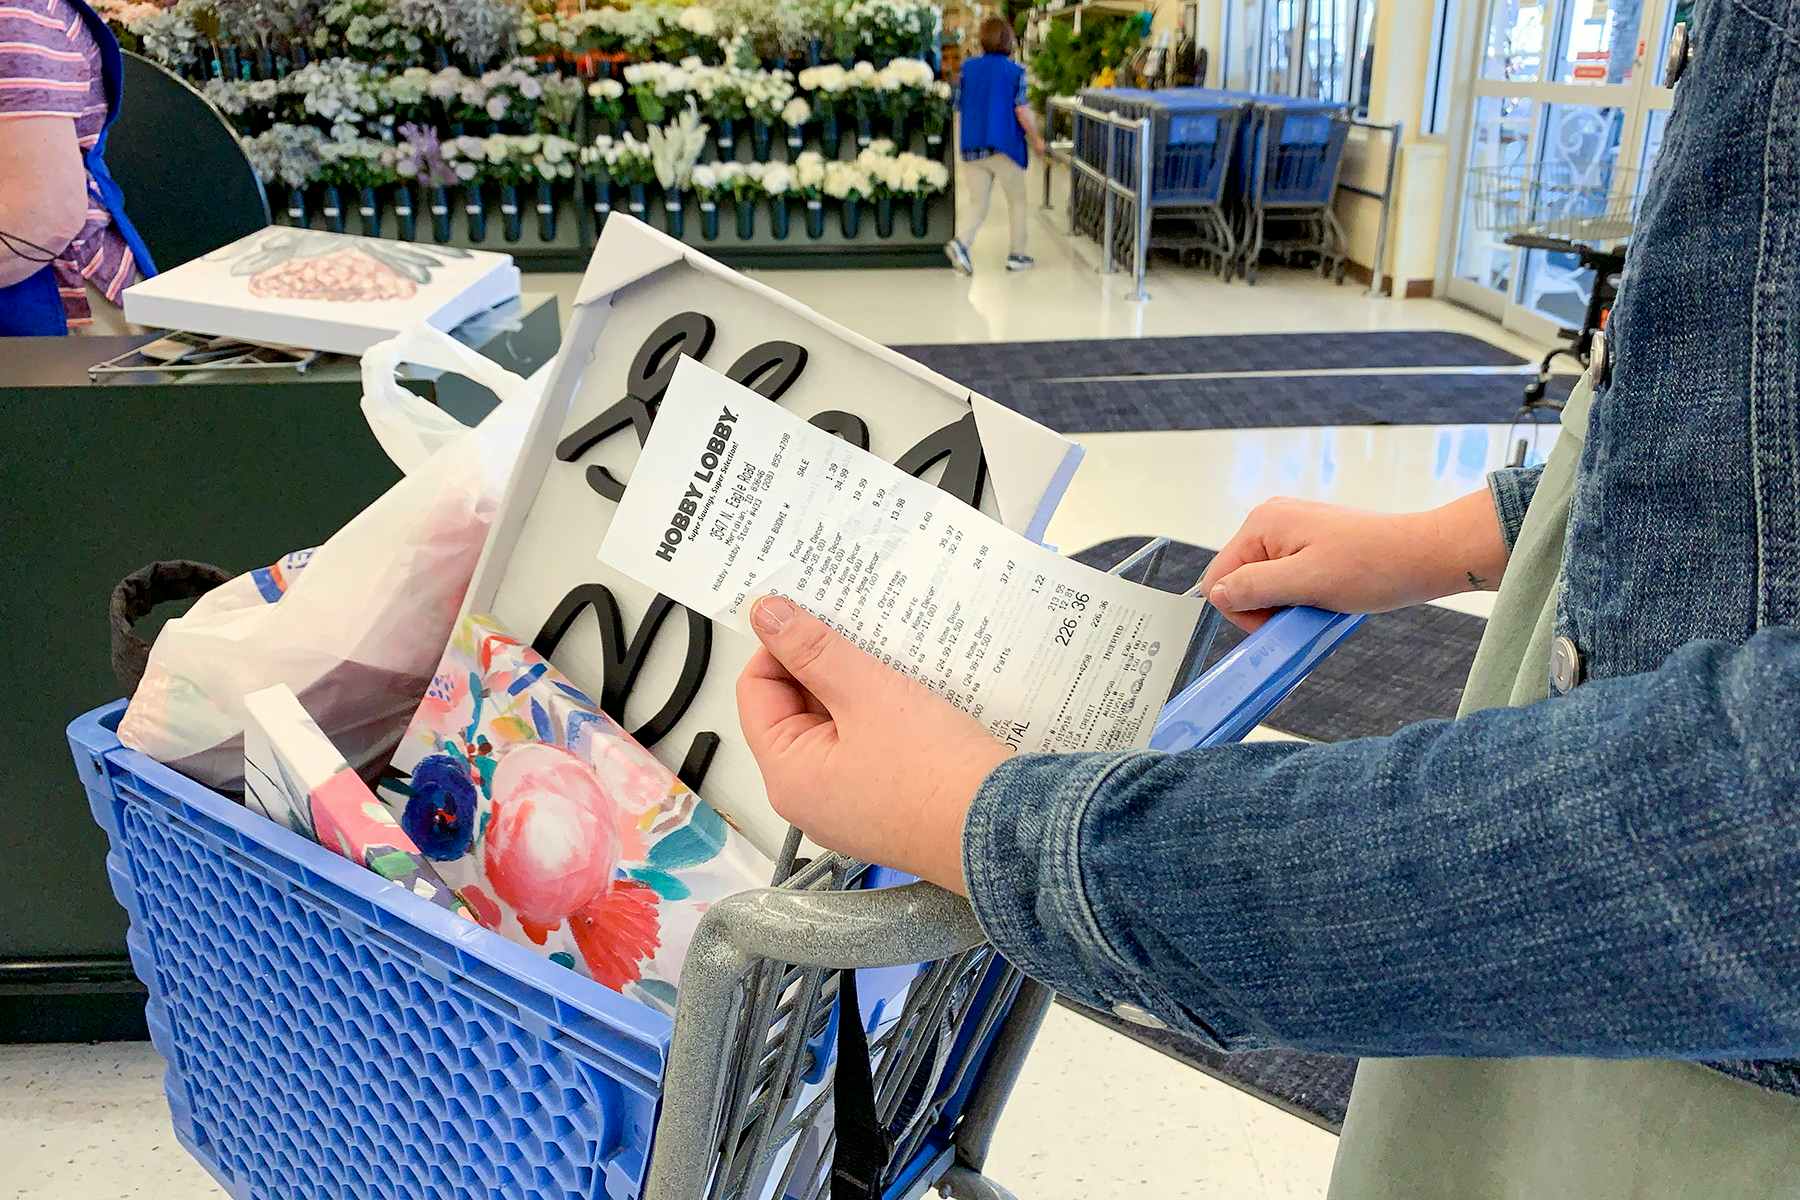 A woman holding a receipt in front of a basket filled with products at the Hobby Lobby return register.